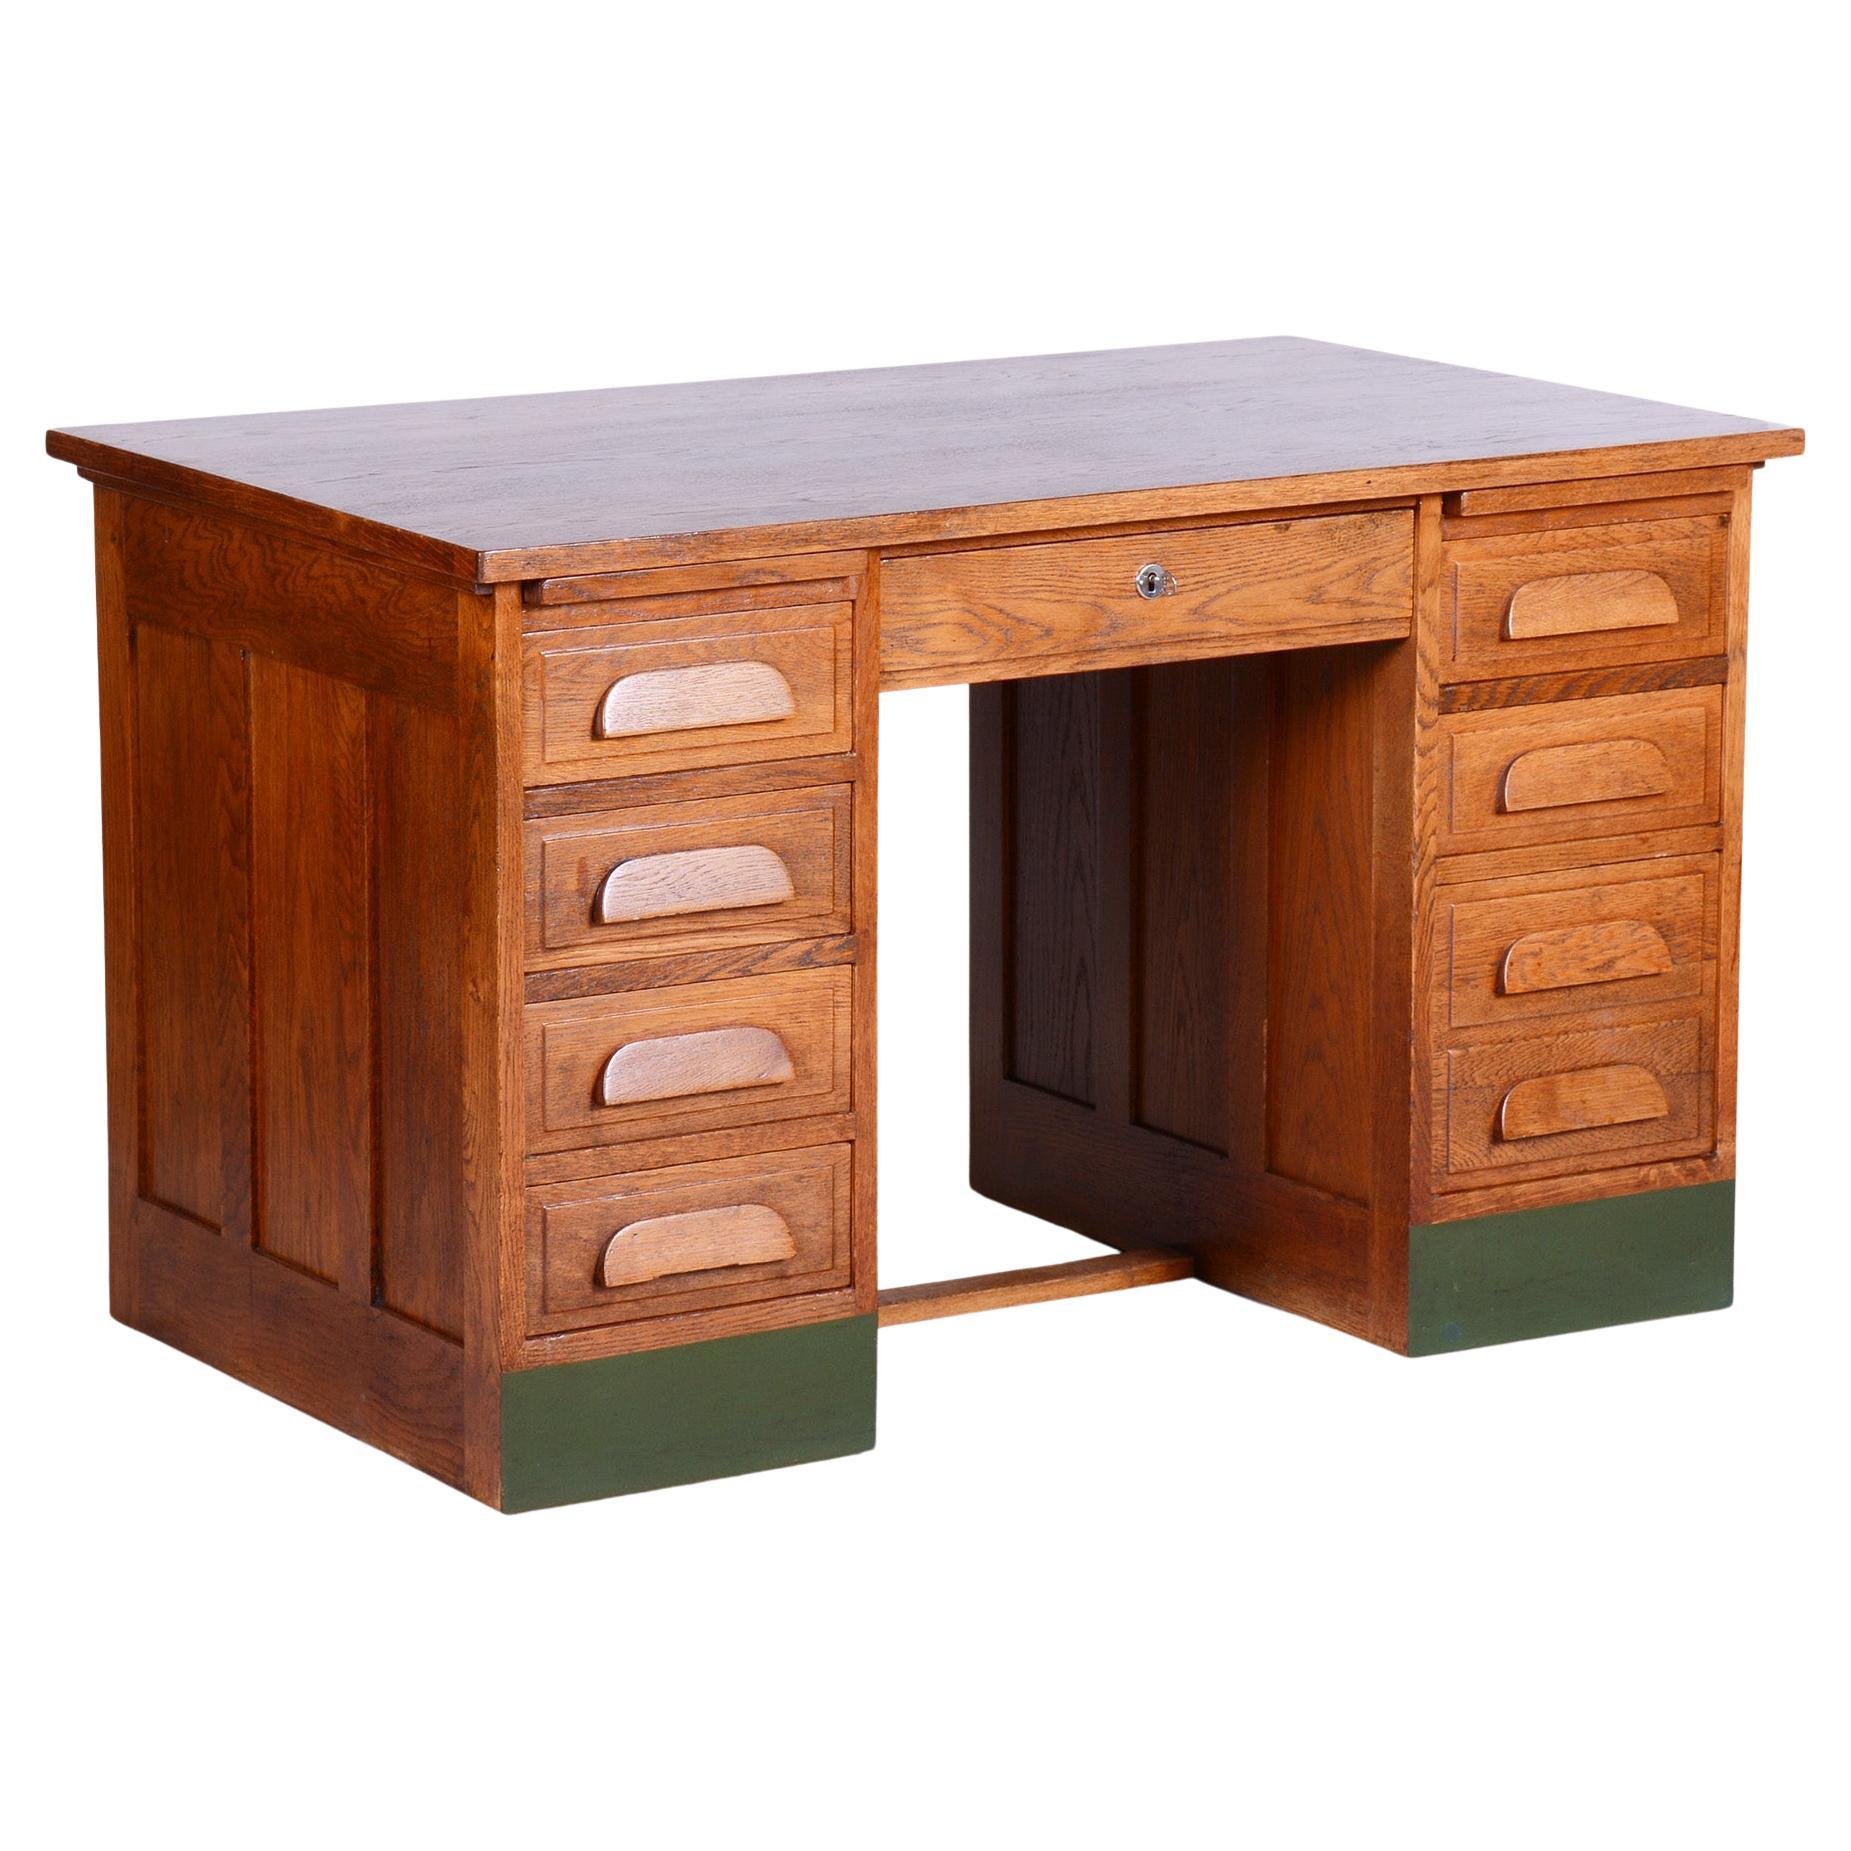 Restored Art Deco Solid Oak Writing Desk Made in the 1930s, Czechia For Sale